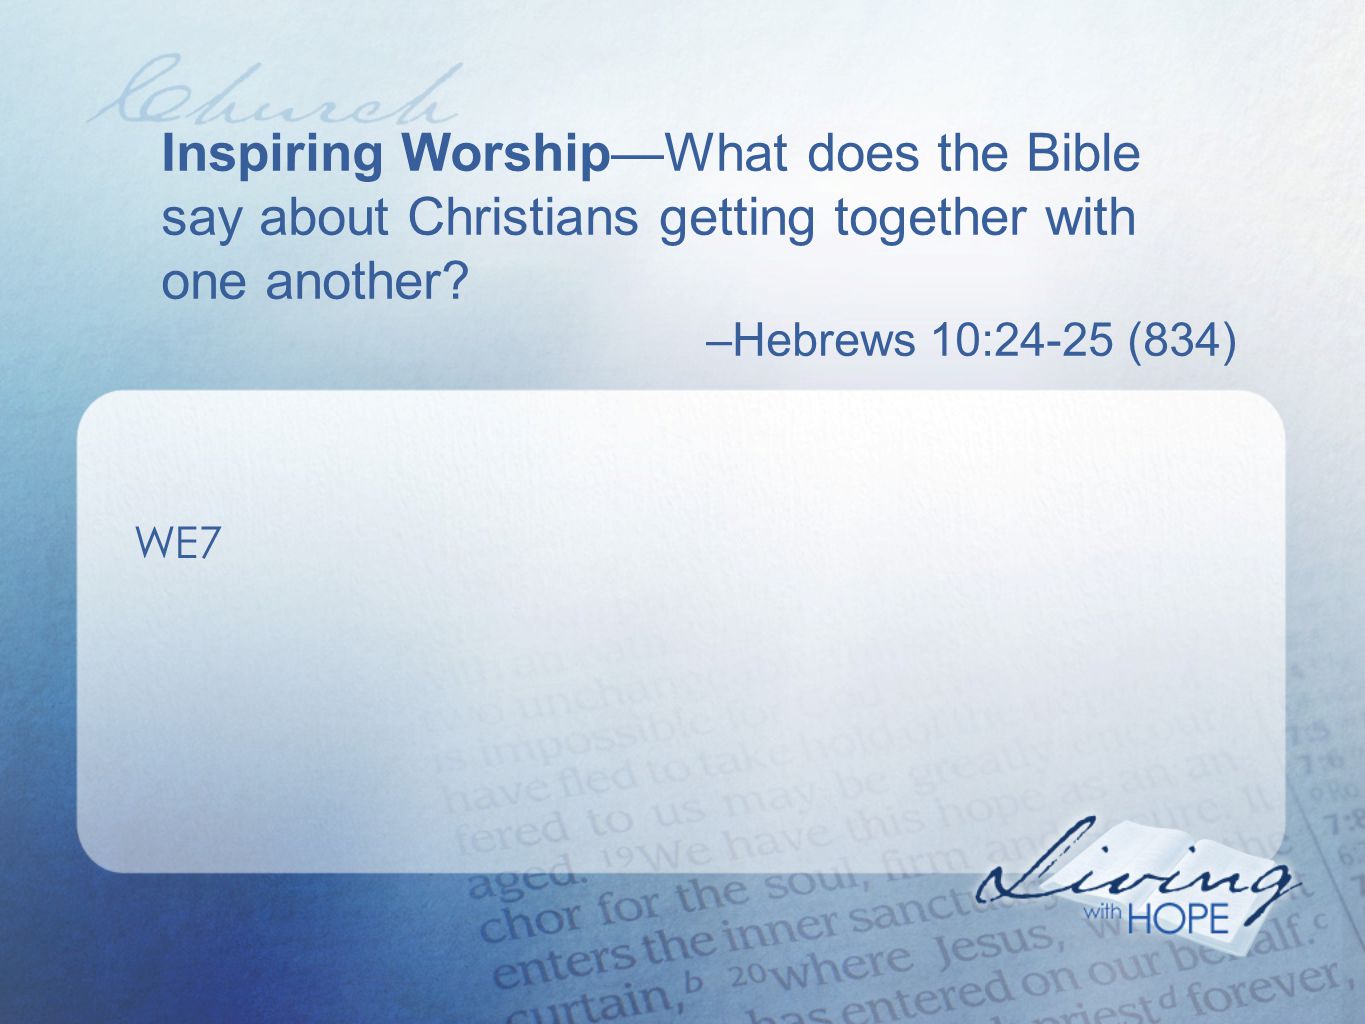 Inspiring Worship—What does the Bible say about Christians getting together with one another.